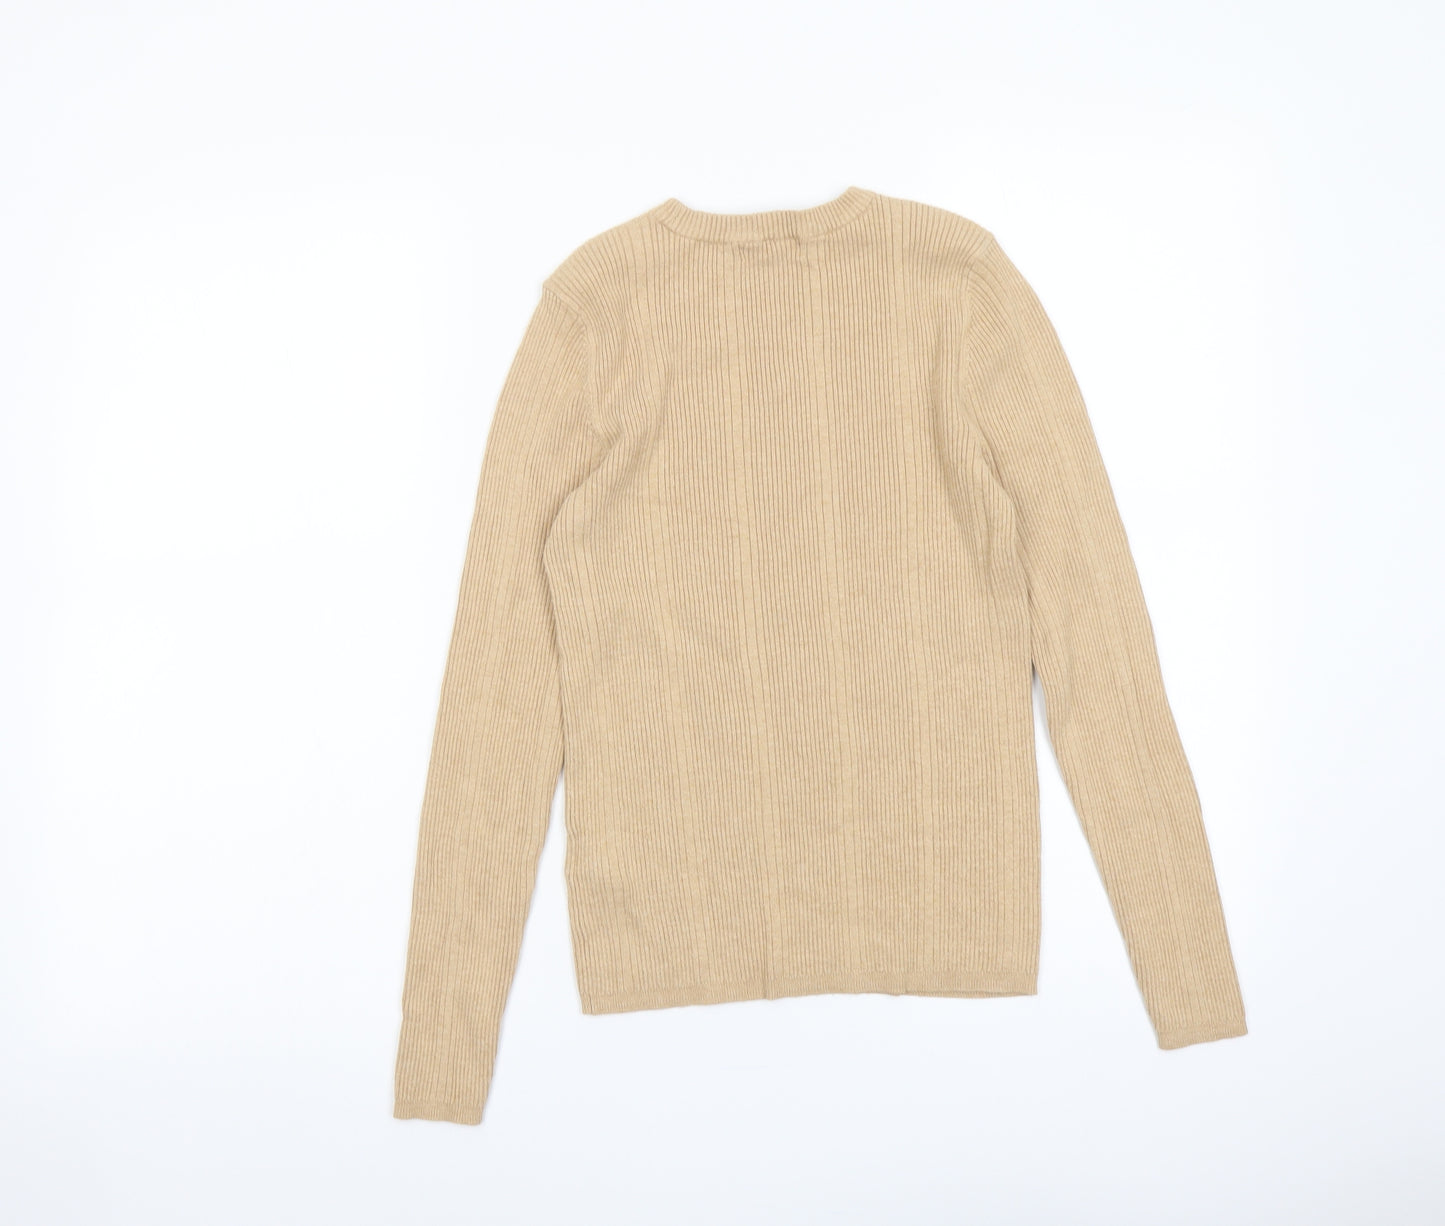 Marks and Spencer Womens Beige Round Neck Viscose Pullover Jumper Size 10